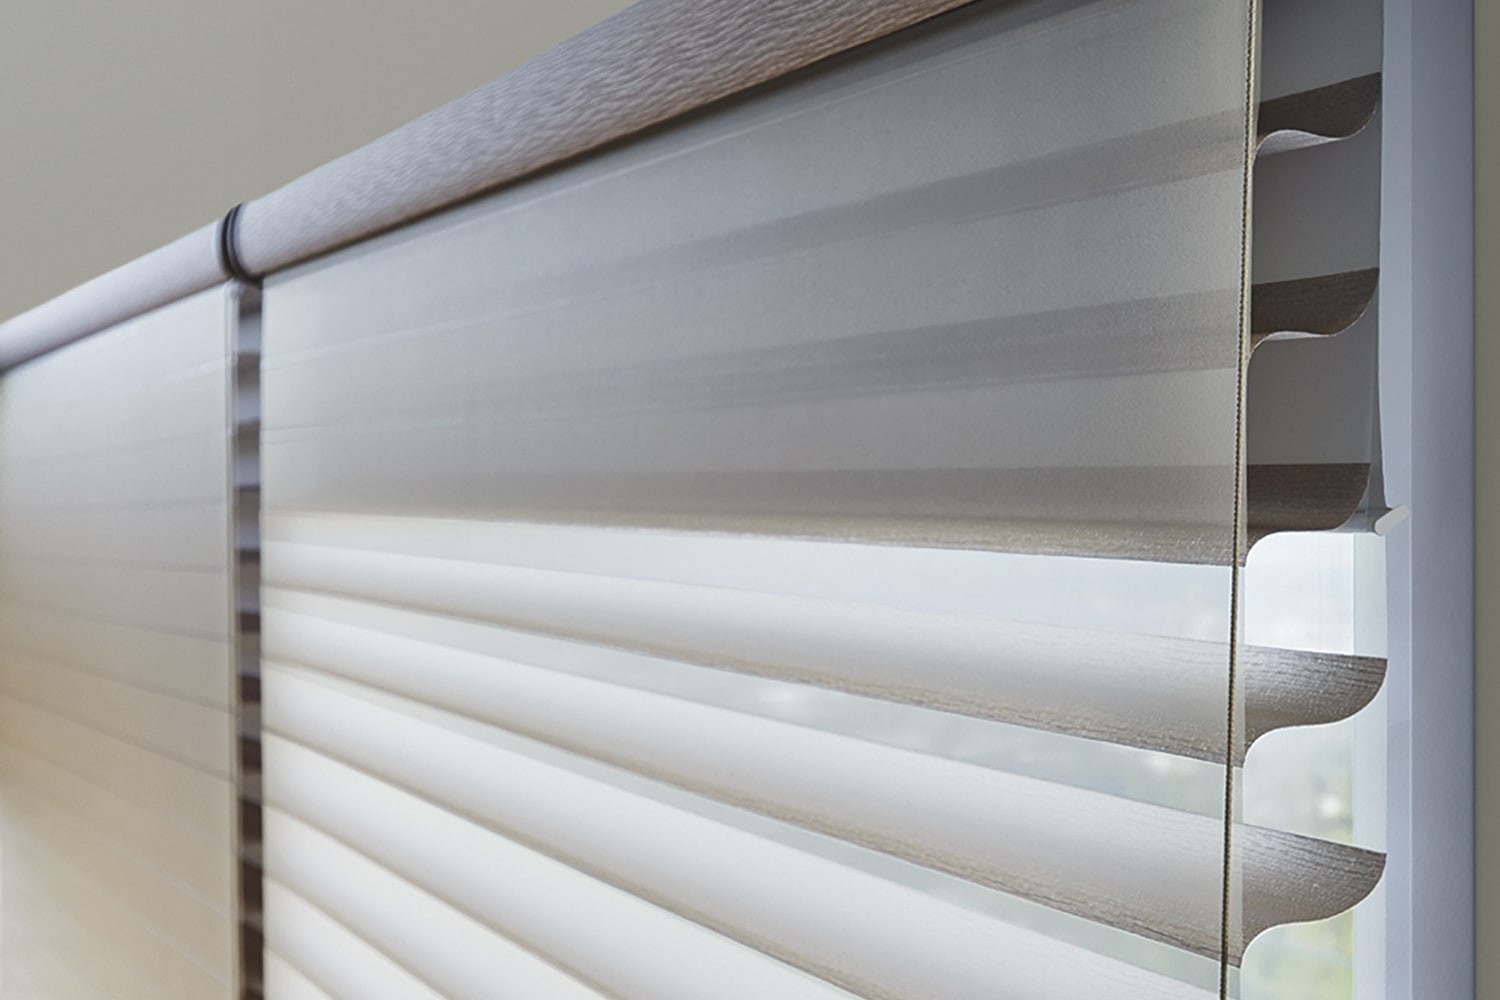 Bedroom Blinds Window Dual Shade Close Up - Fabric Vanes between 2 layers of sheer. A light blocking fabric rolls out from behind for sleep time and utmost privacy.